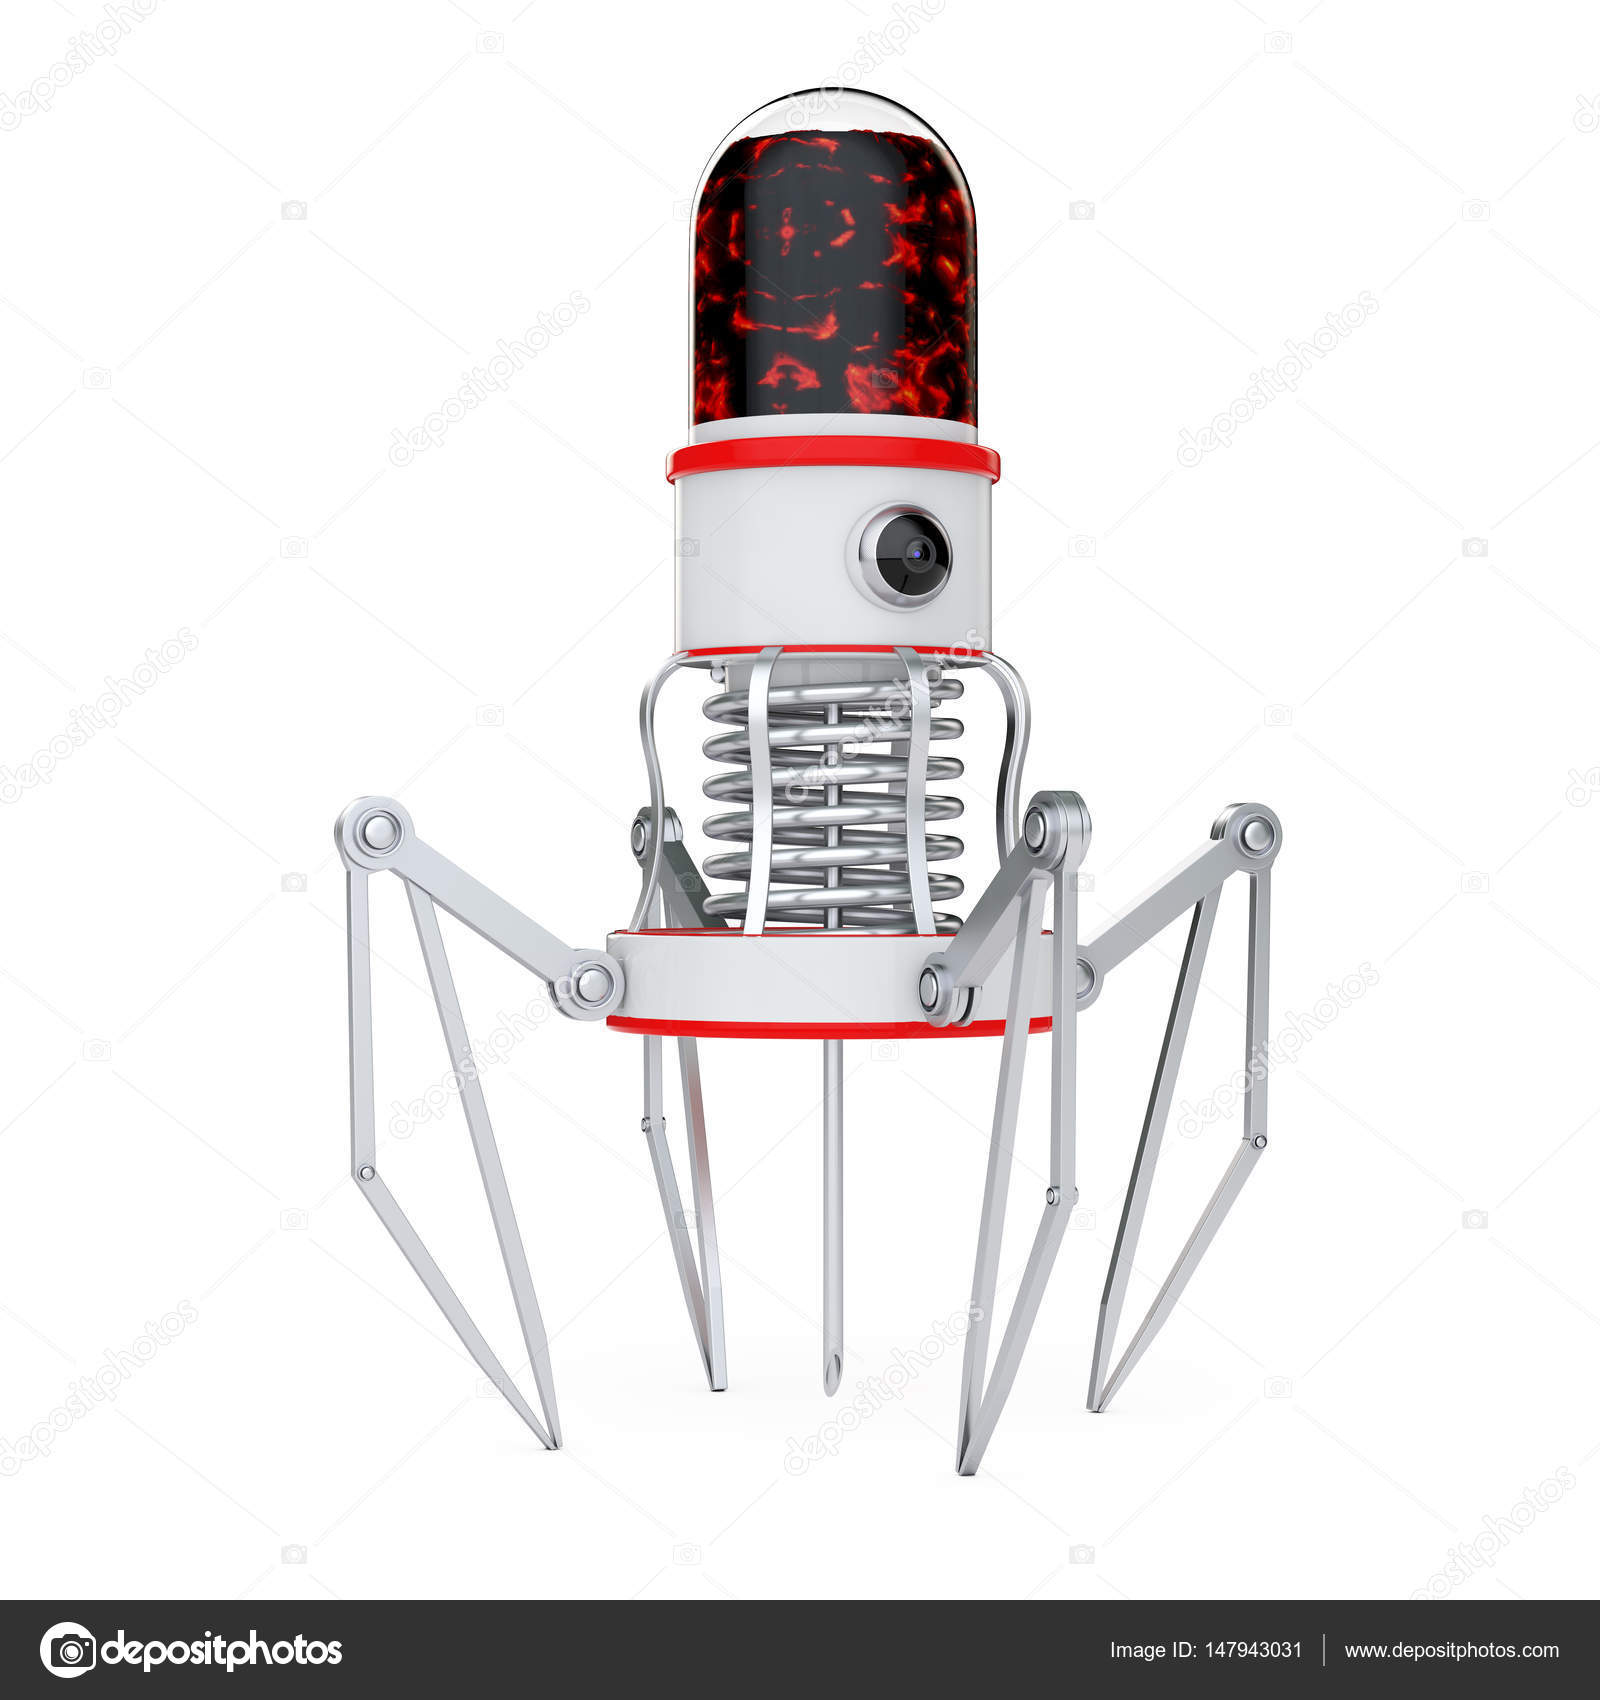 Ud over Påstand forbundet Blood Nano Robot with Camera, Claws and Needle. 3d Rendering Stock Photo by  ©doomu 147943031